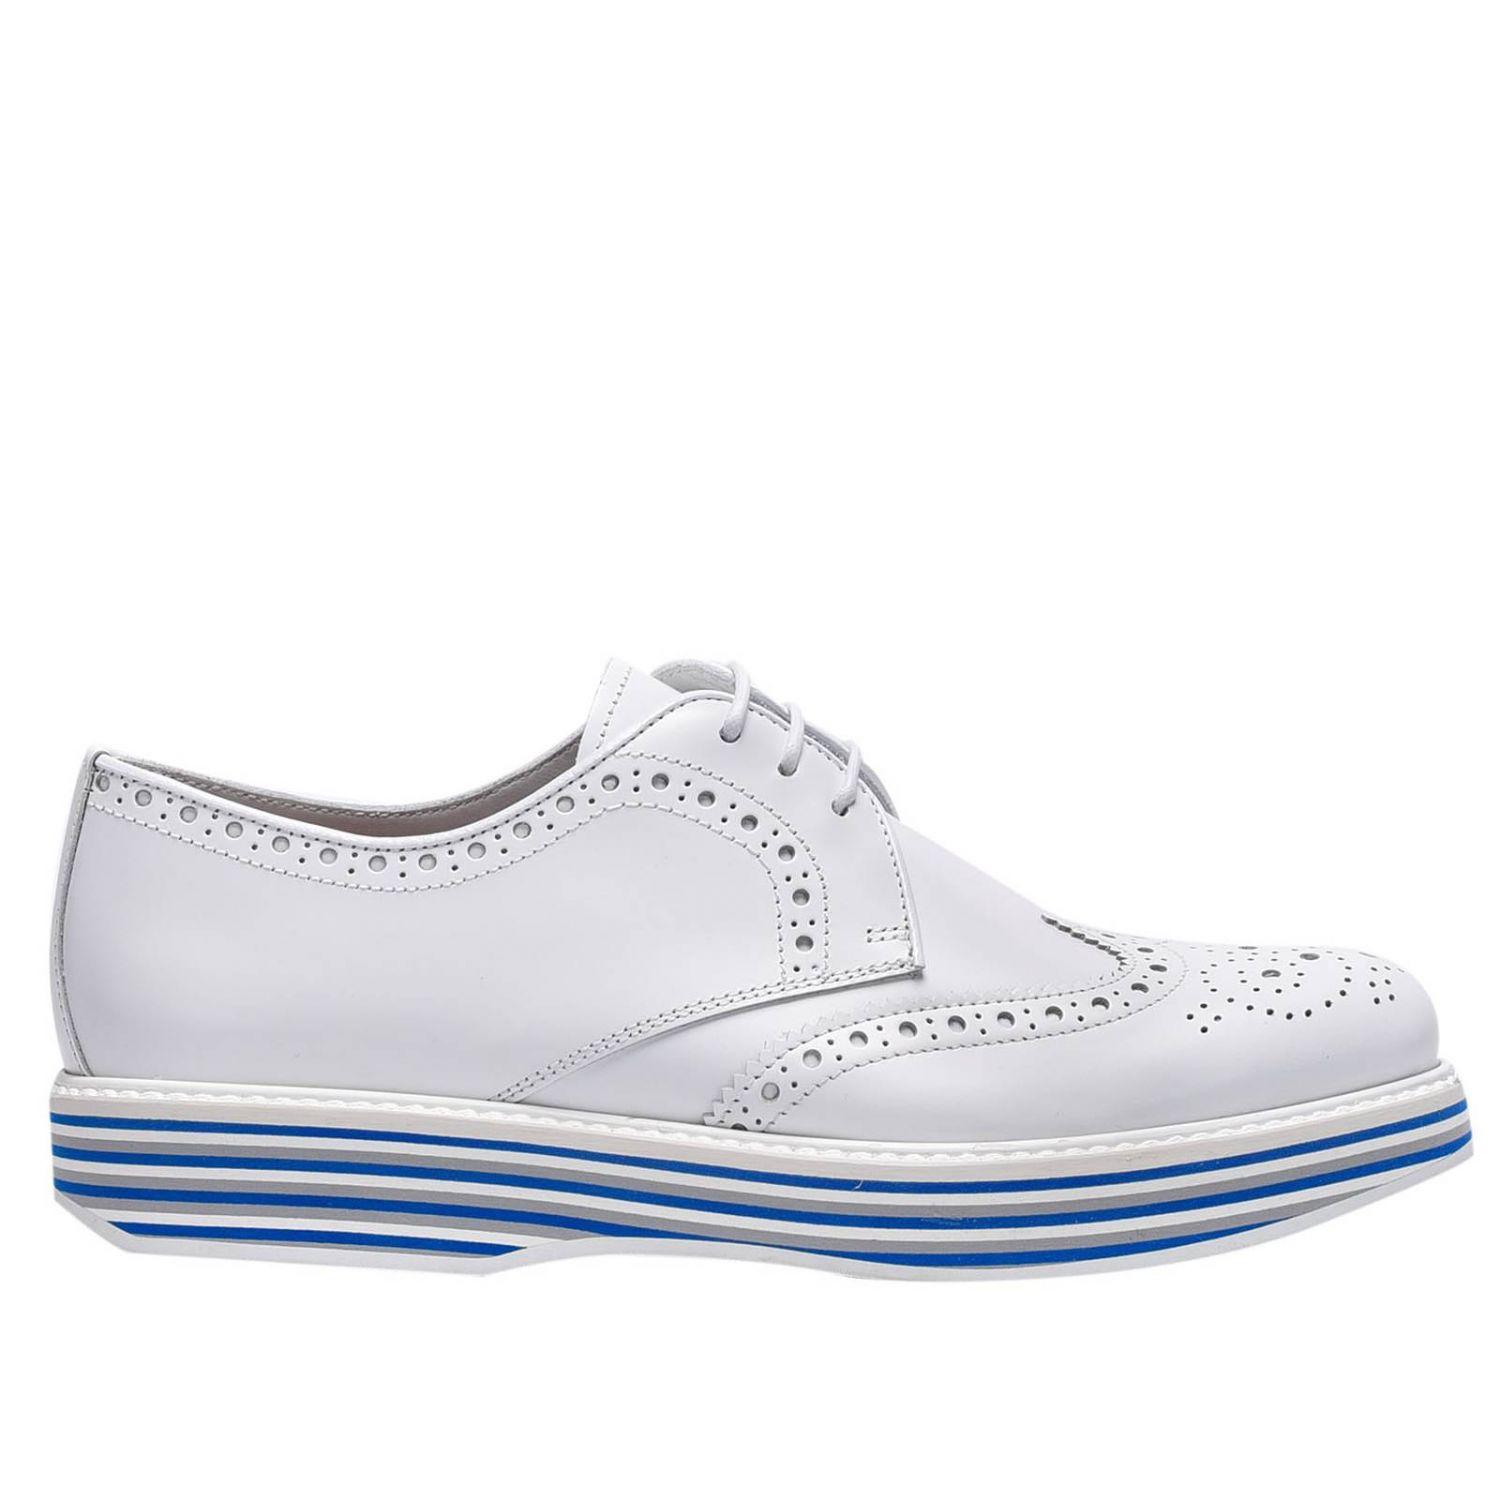 Church's Leather Women's Oxford Shoes in White - Lyst